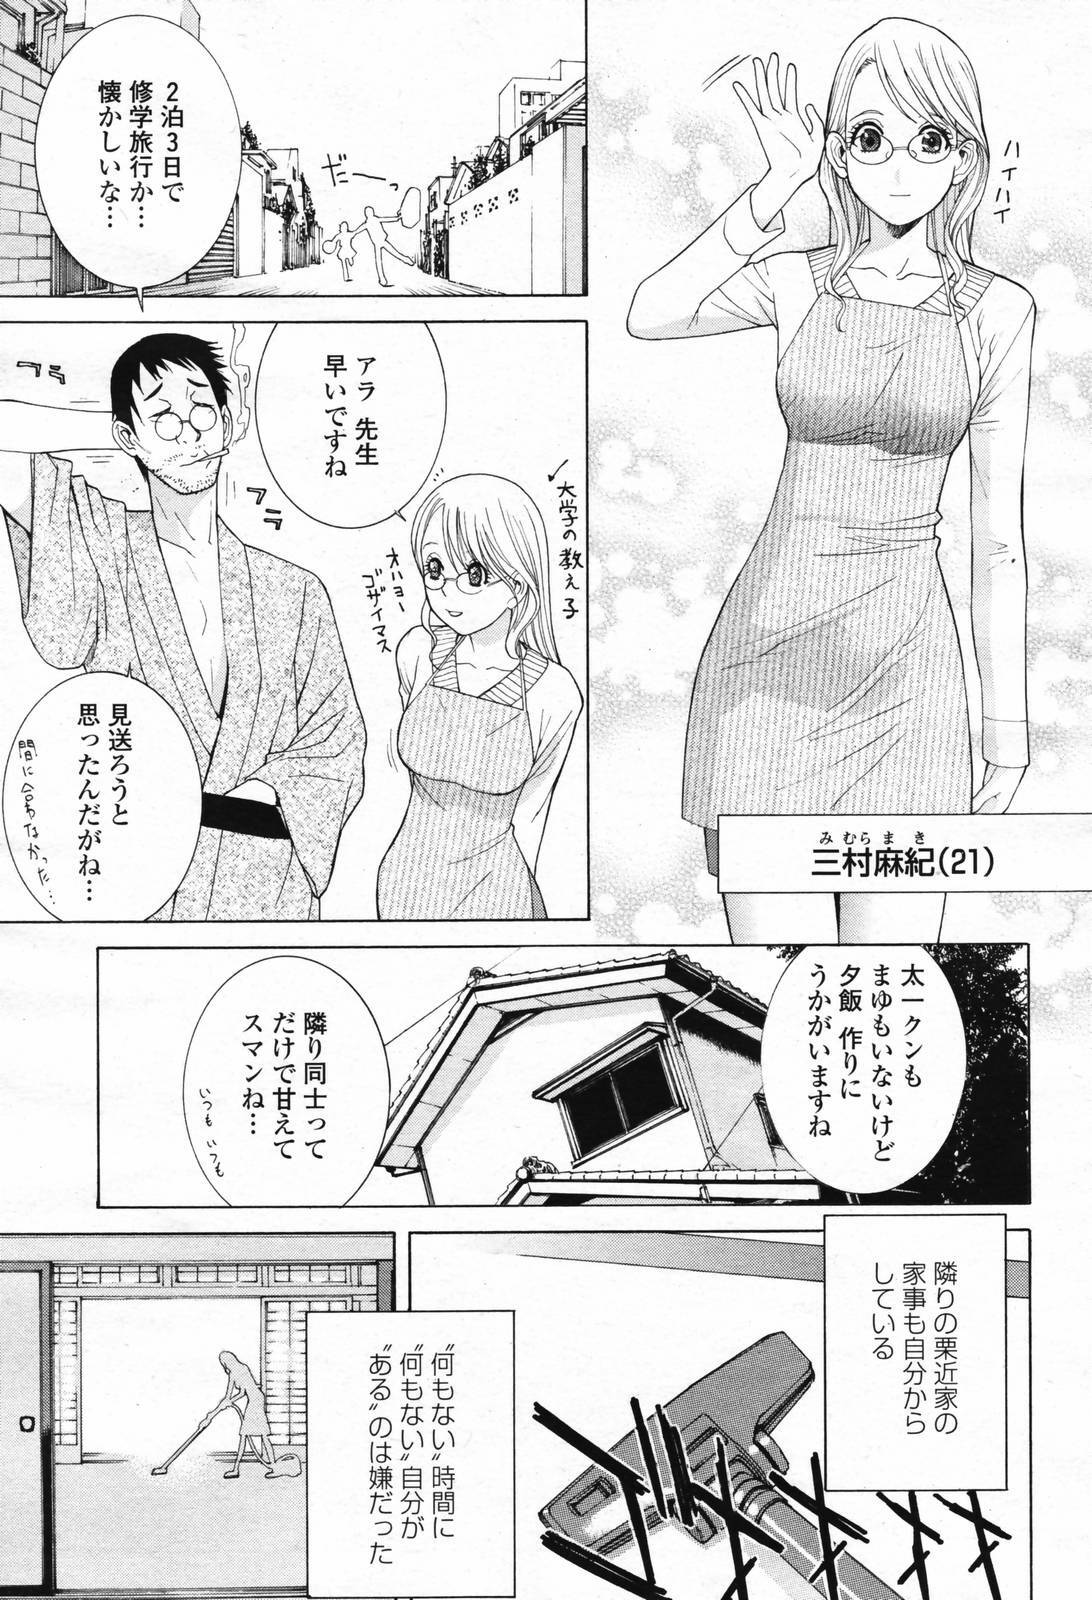 COMIC Momohime 2007-02 page 35 full